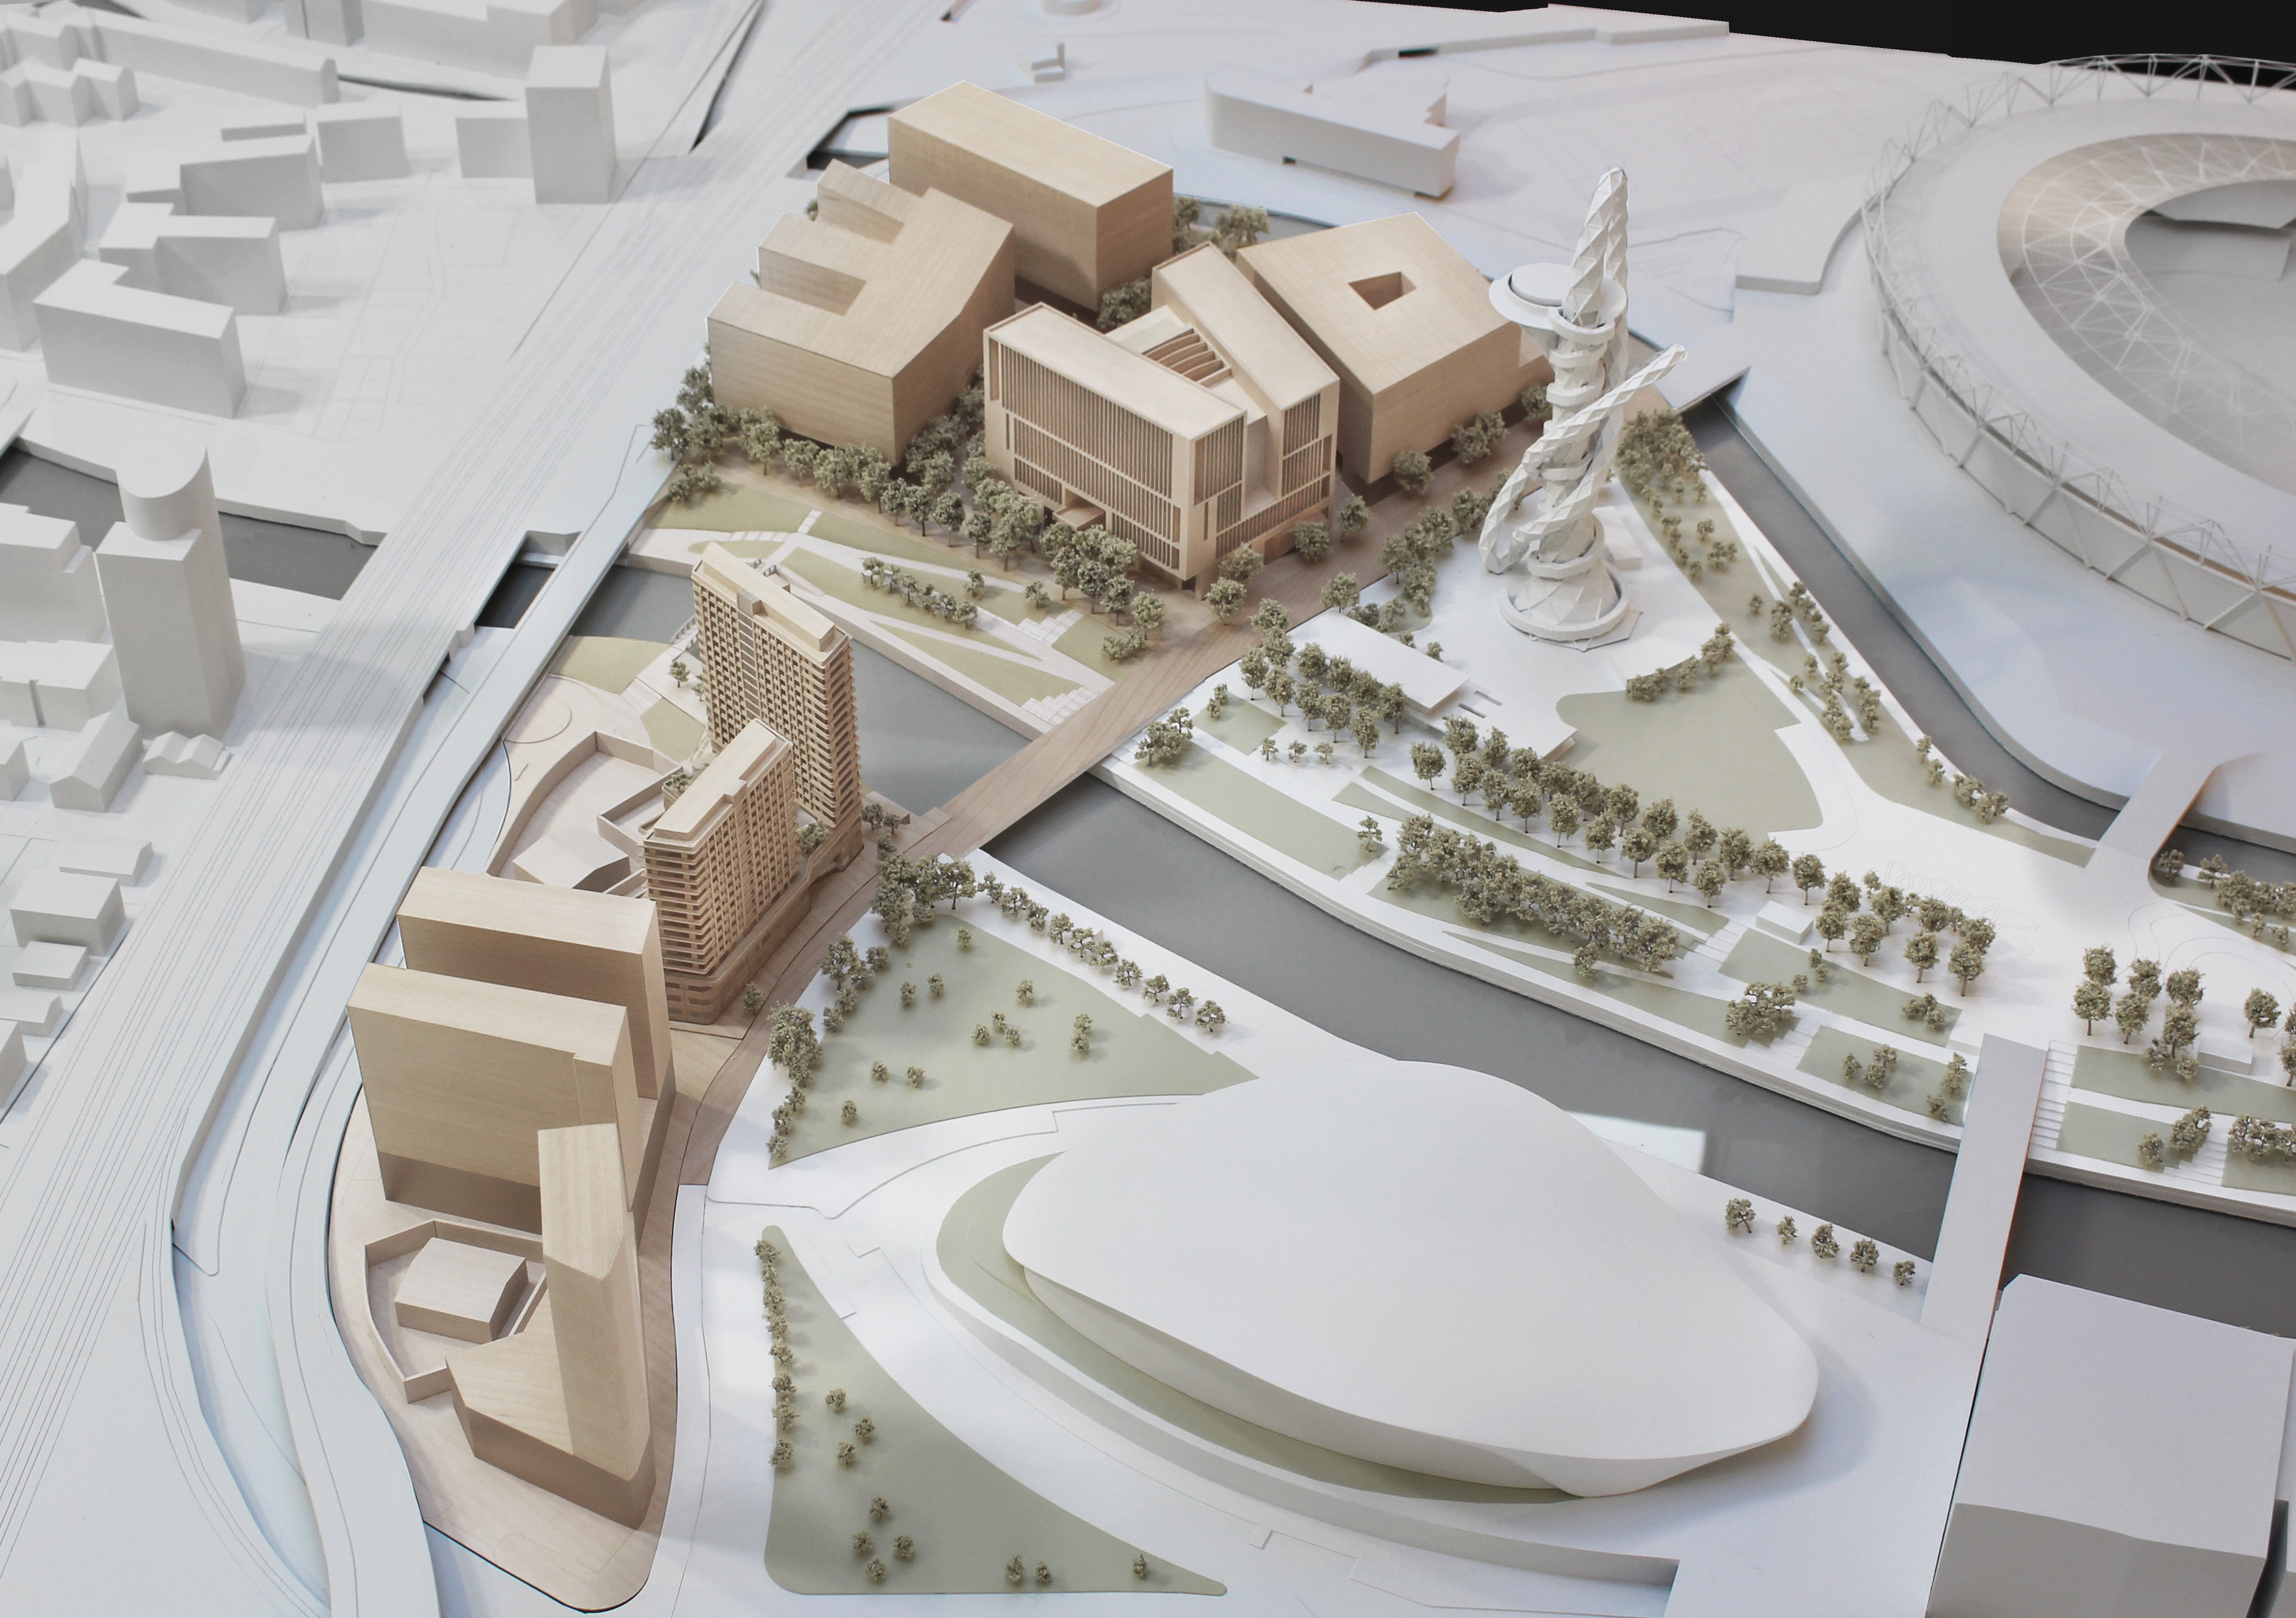 New Campus for University of the Arts London / Stanton Williams